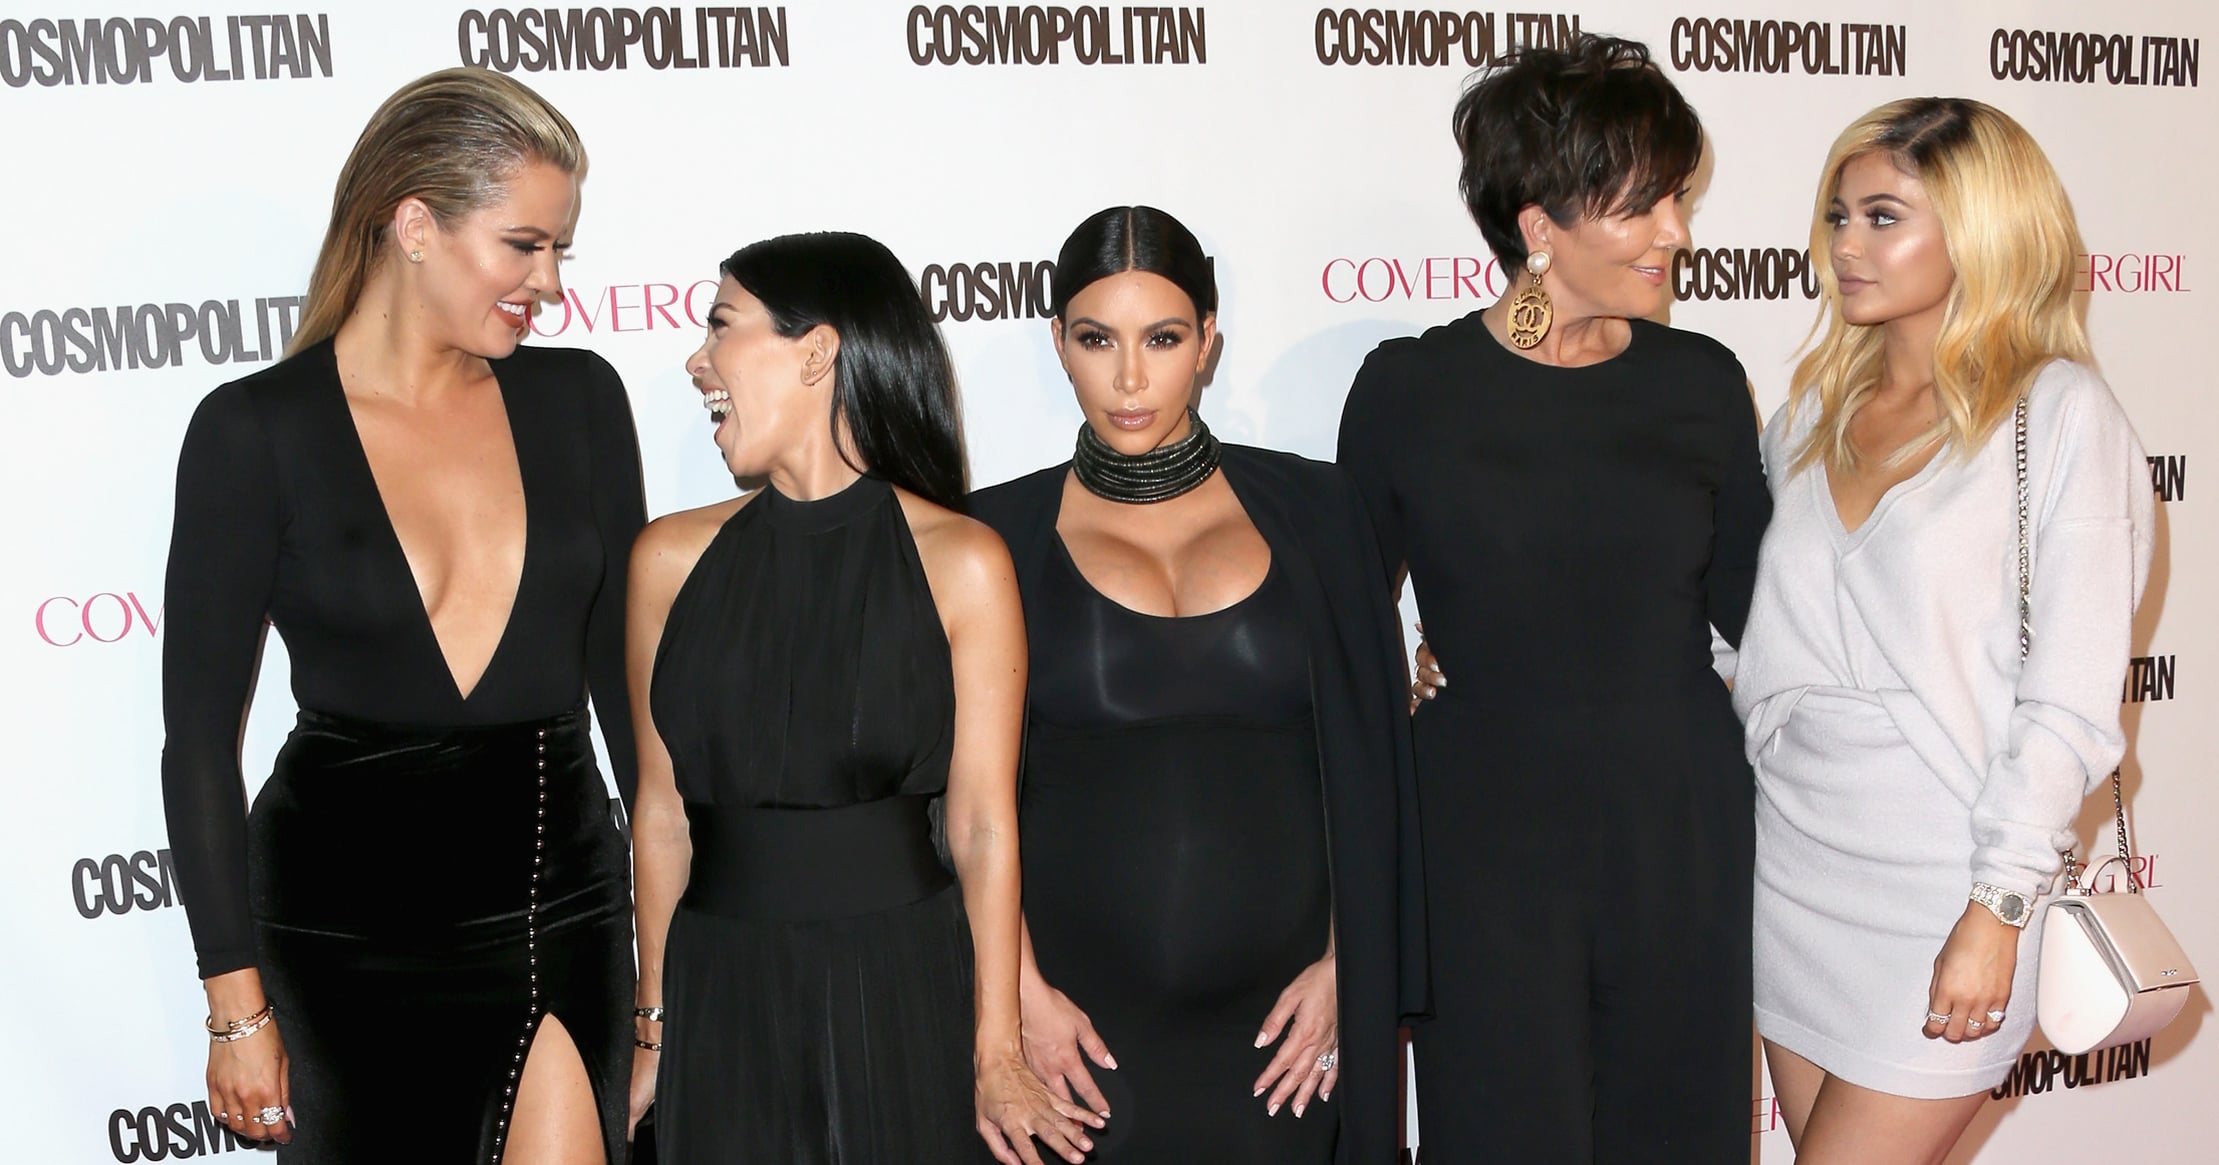 The Woman Who Built A 7M Following For Impersonating The Kardashians